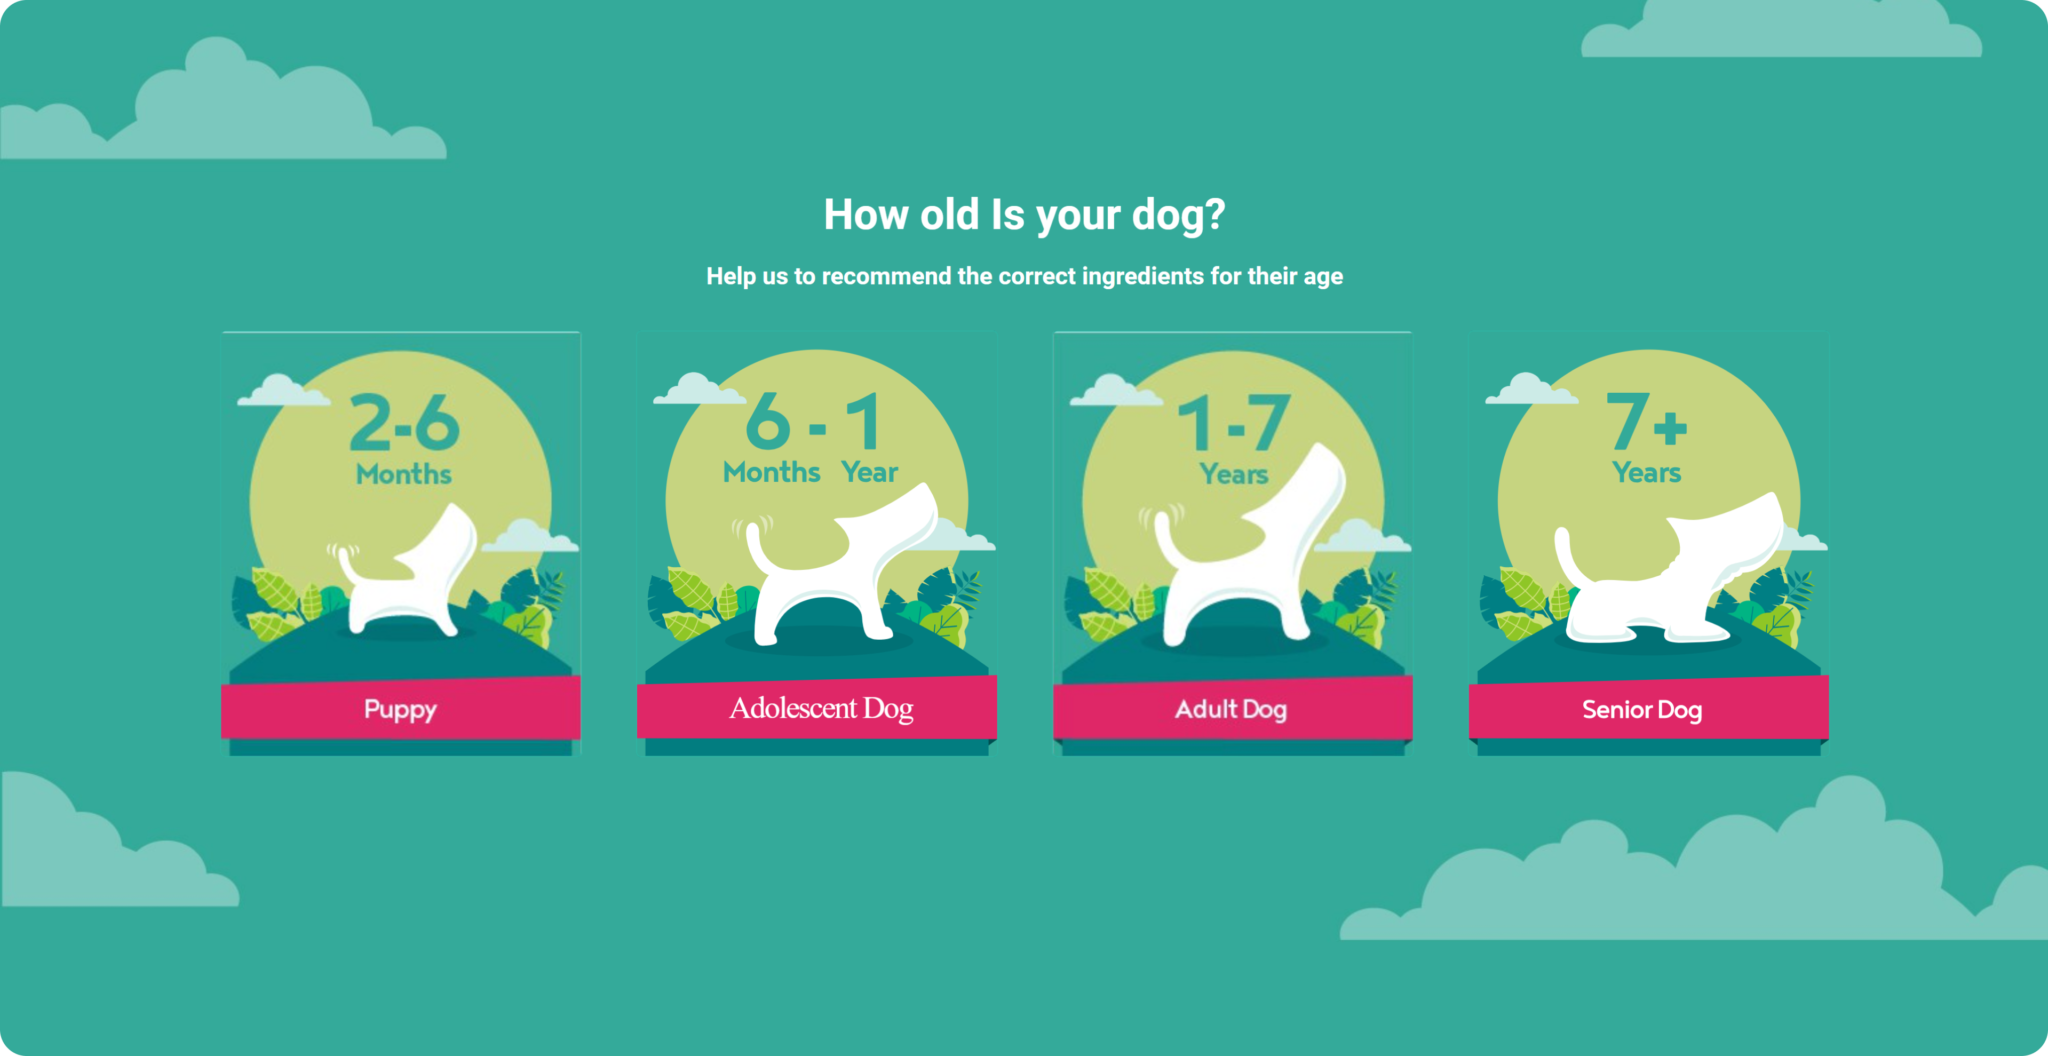 A-OK9's Shop Quiz asking customers to identify how old their dog is.